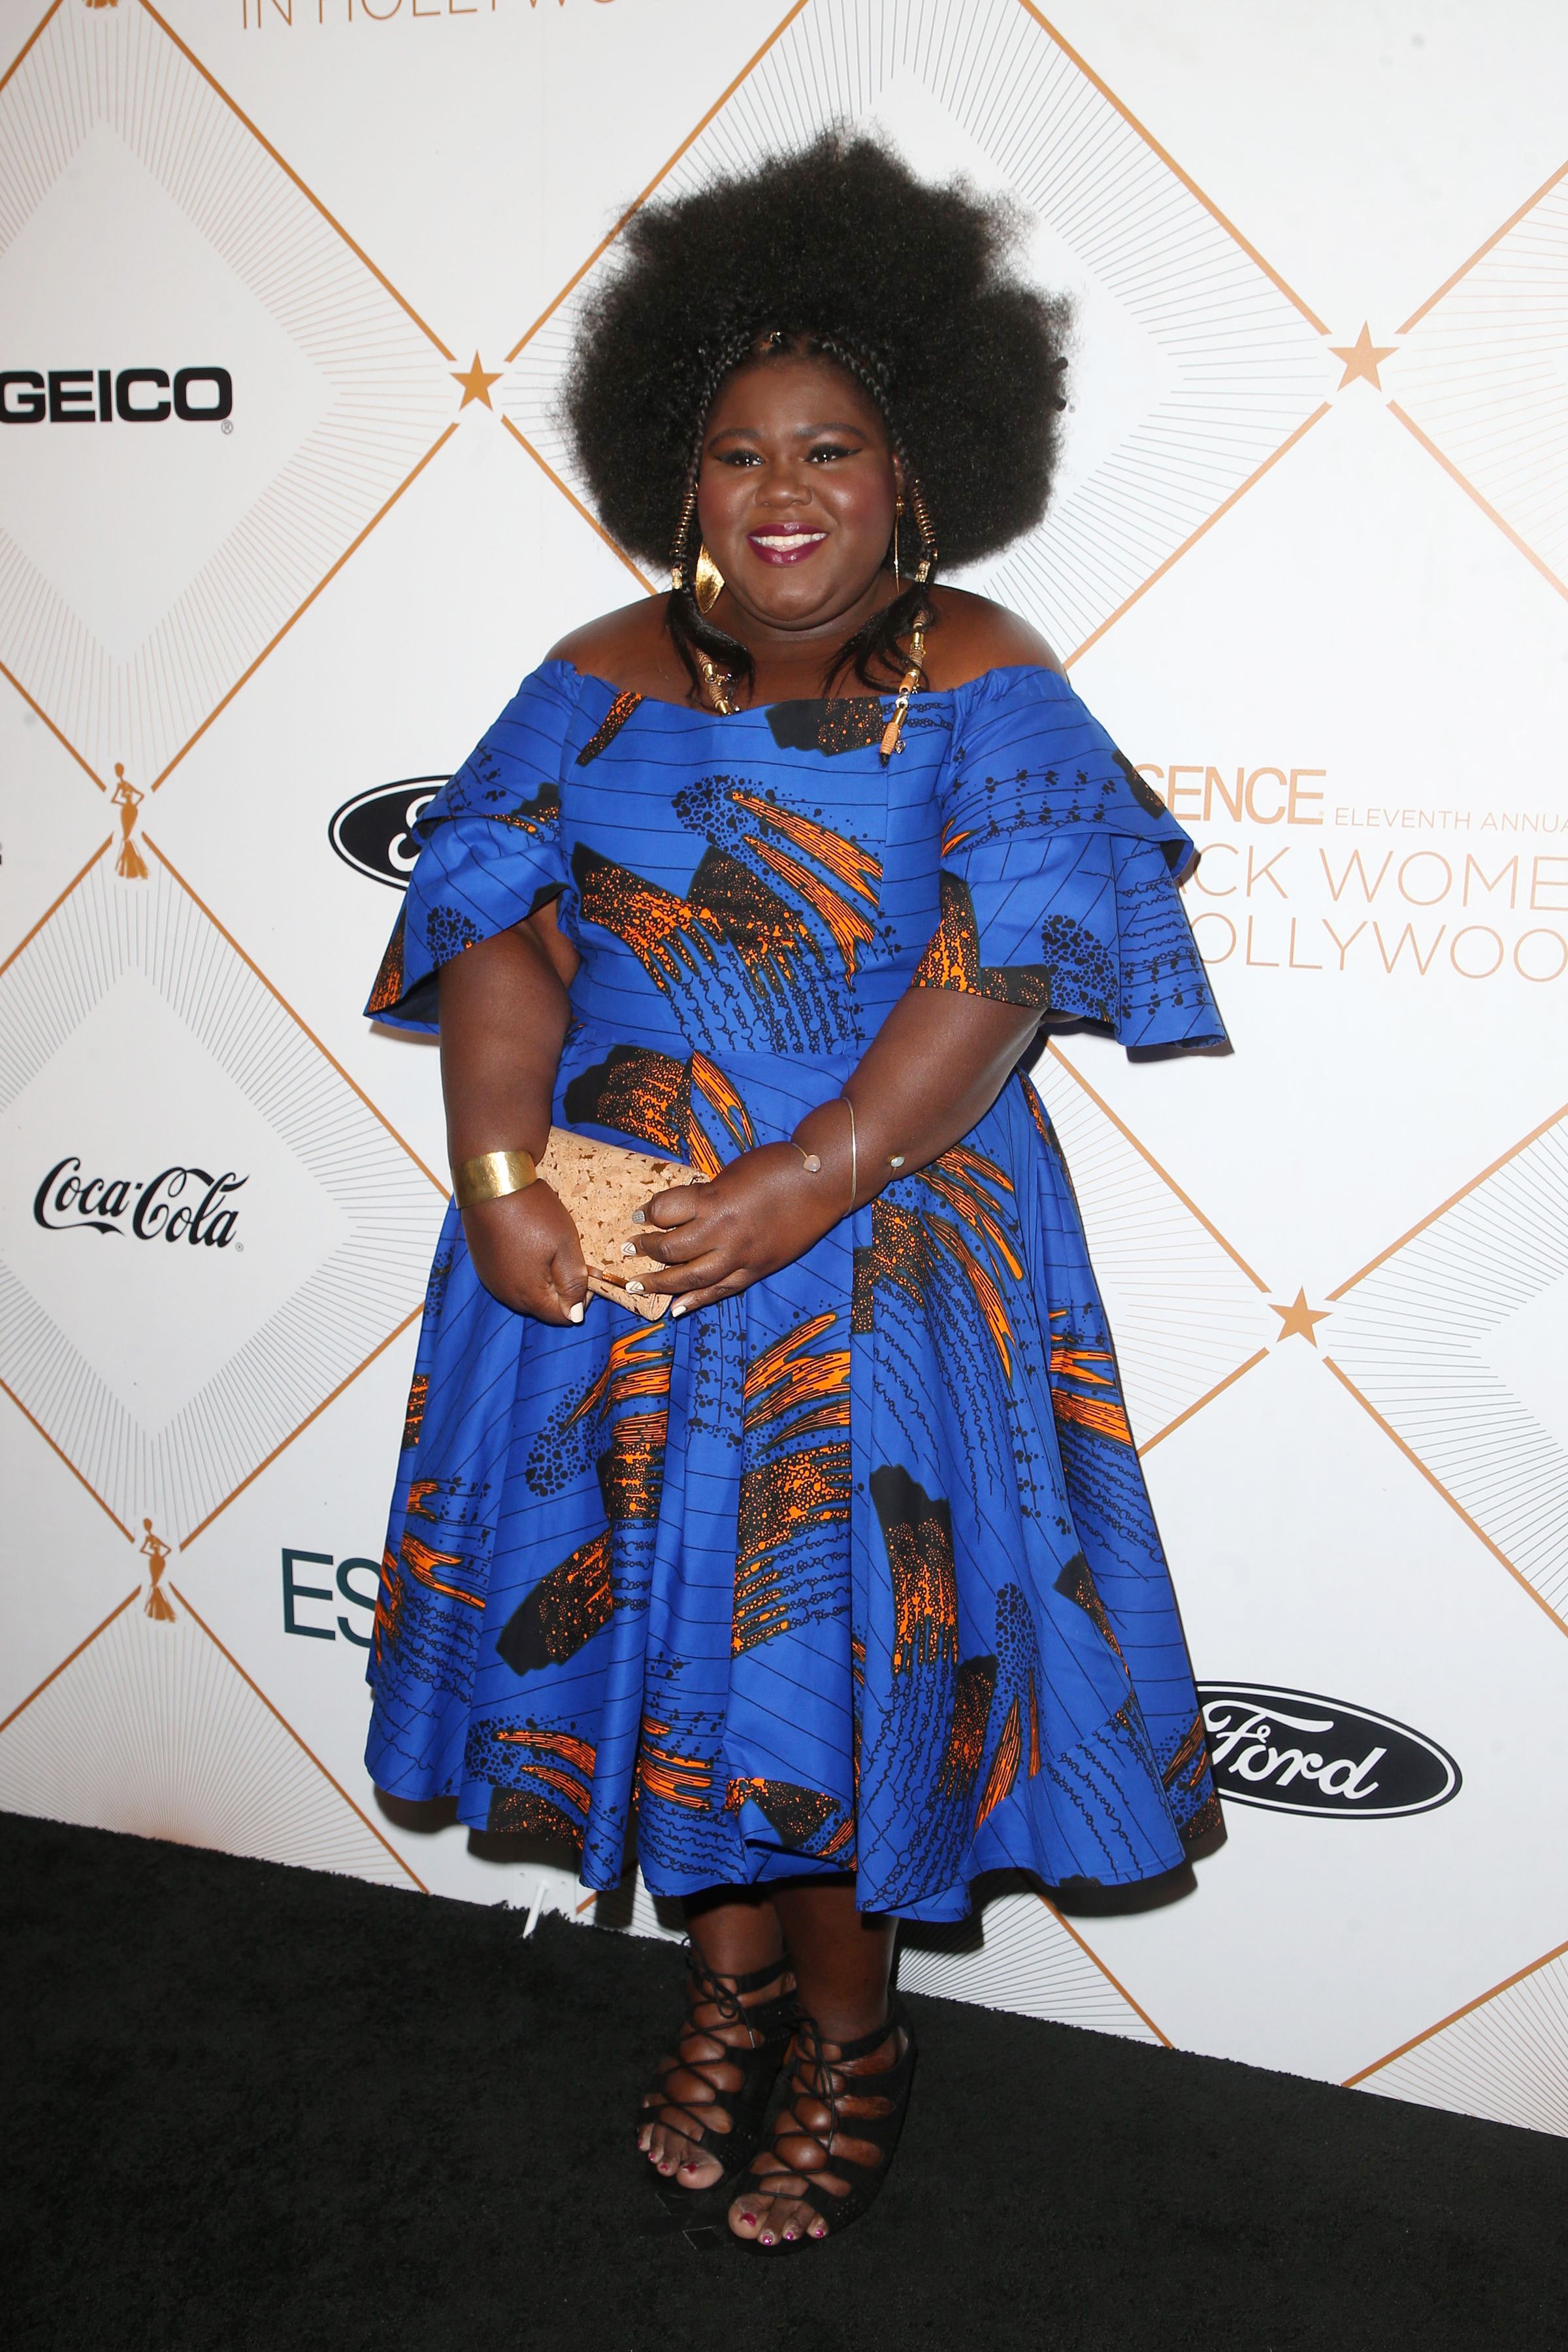 Stars Shined Bright On The ESSENCE Black Women In Hollywood Red Carpet
